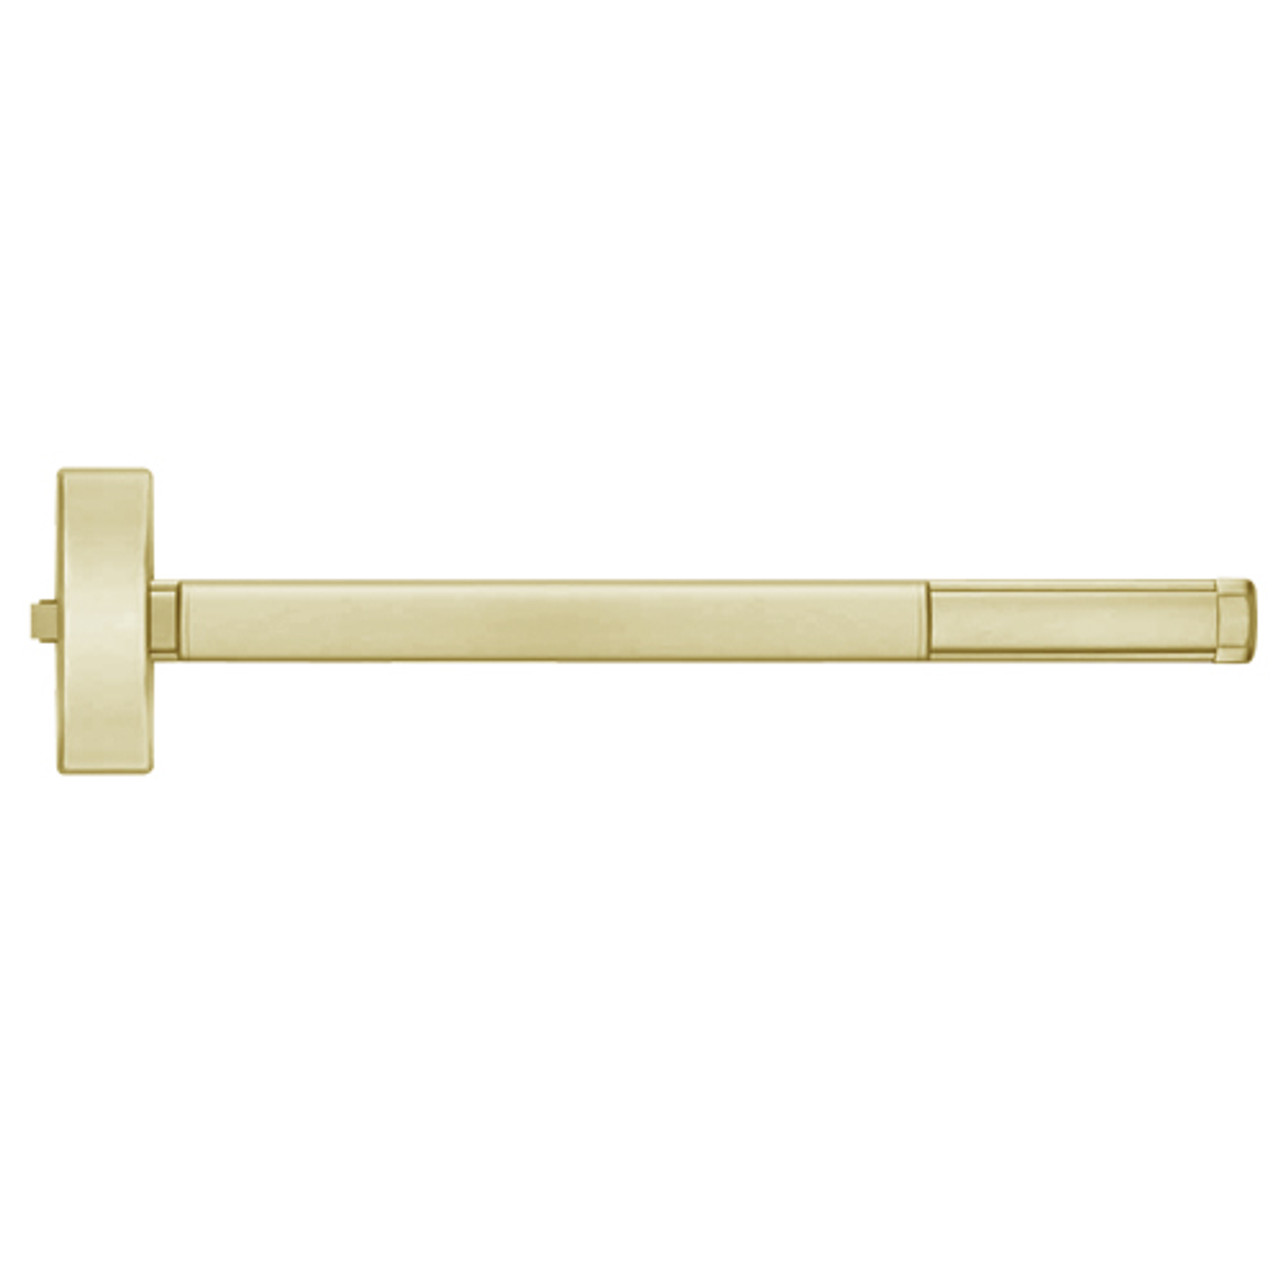 FL2105-606-36 PHI 2100 Series Fire Rated Apex Rim Exit Device Prepped for Key Controls Thumb Piece in Satin Brass Finish